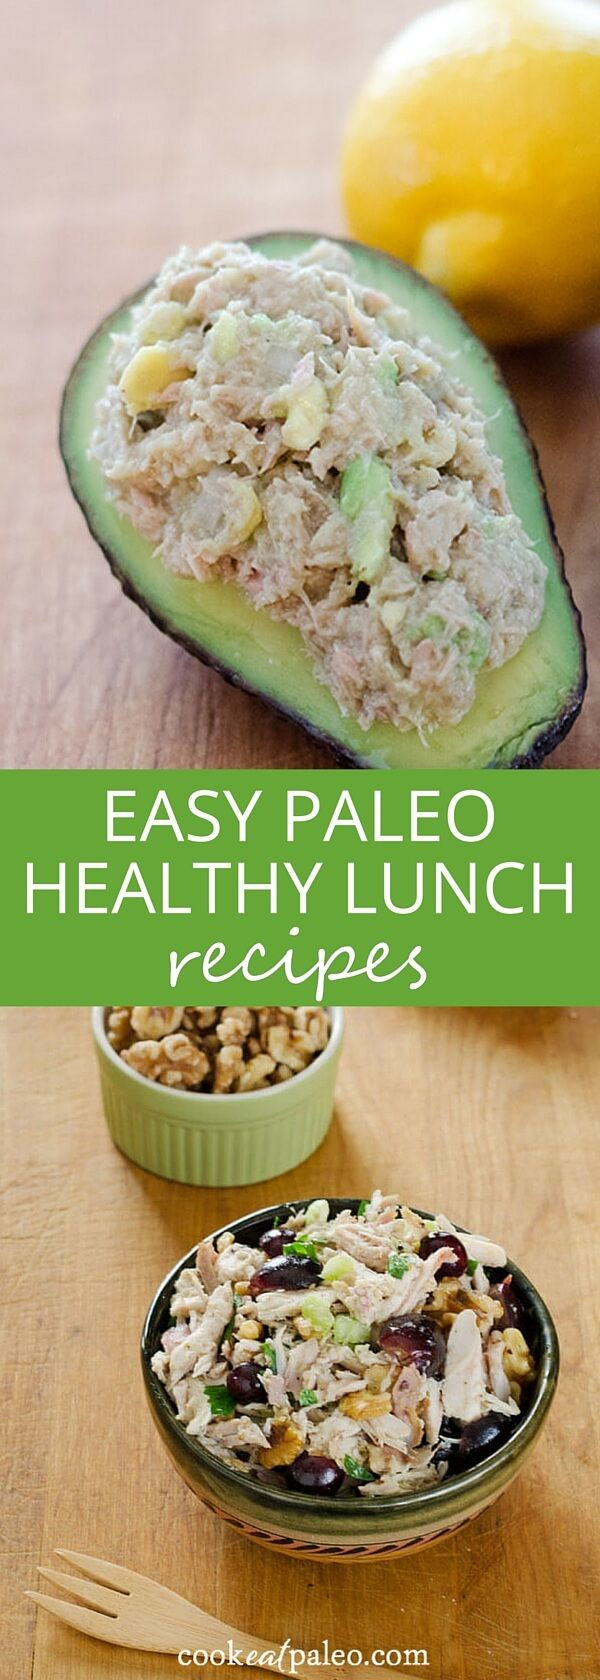 Quick Healthy Lunches
 17 Best images about Recipe Round Ups Low Carb and Paleo